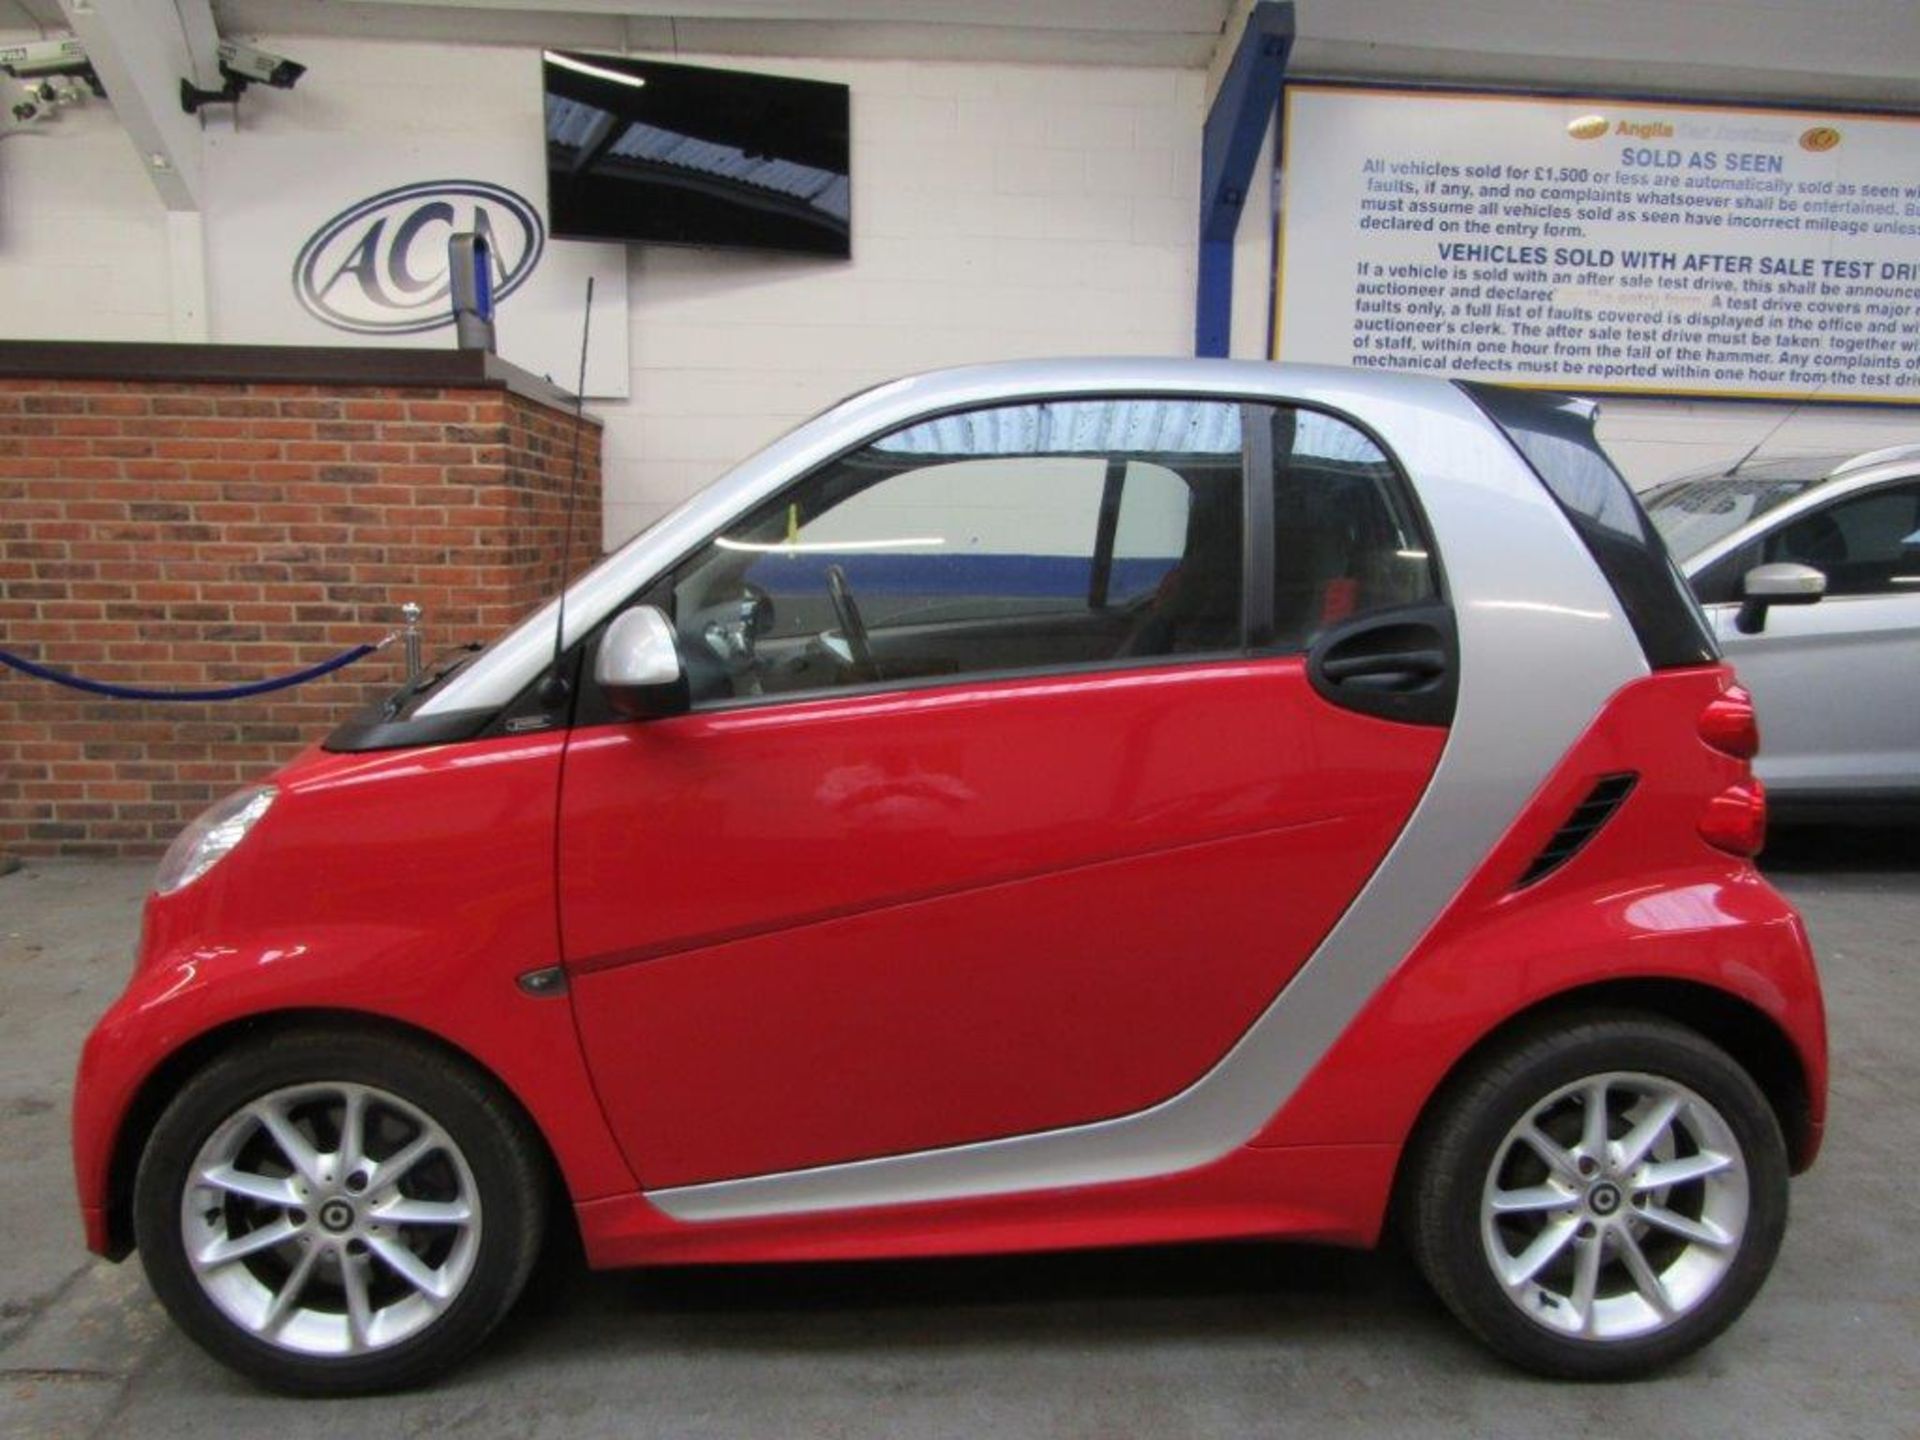 62 12 Smart Fortwo Passion Auto - Image 2 of 18